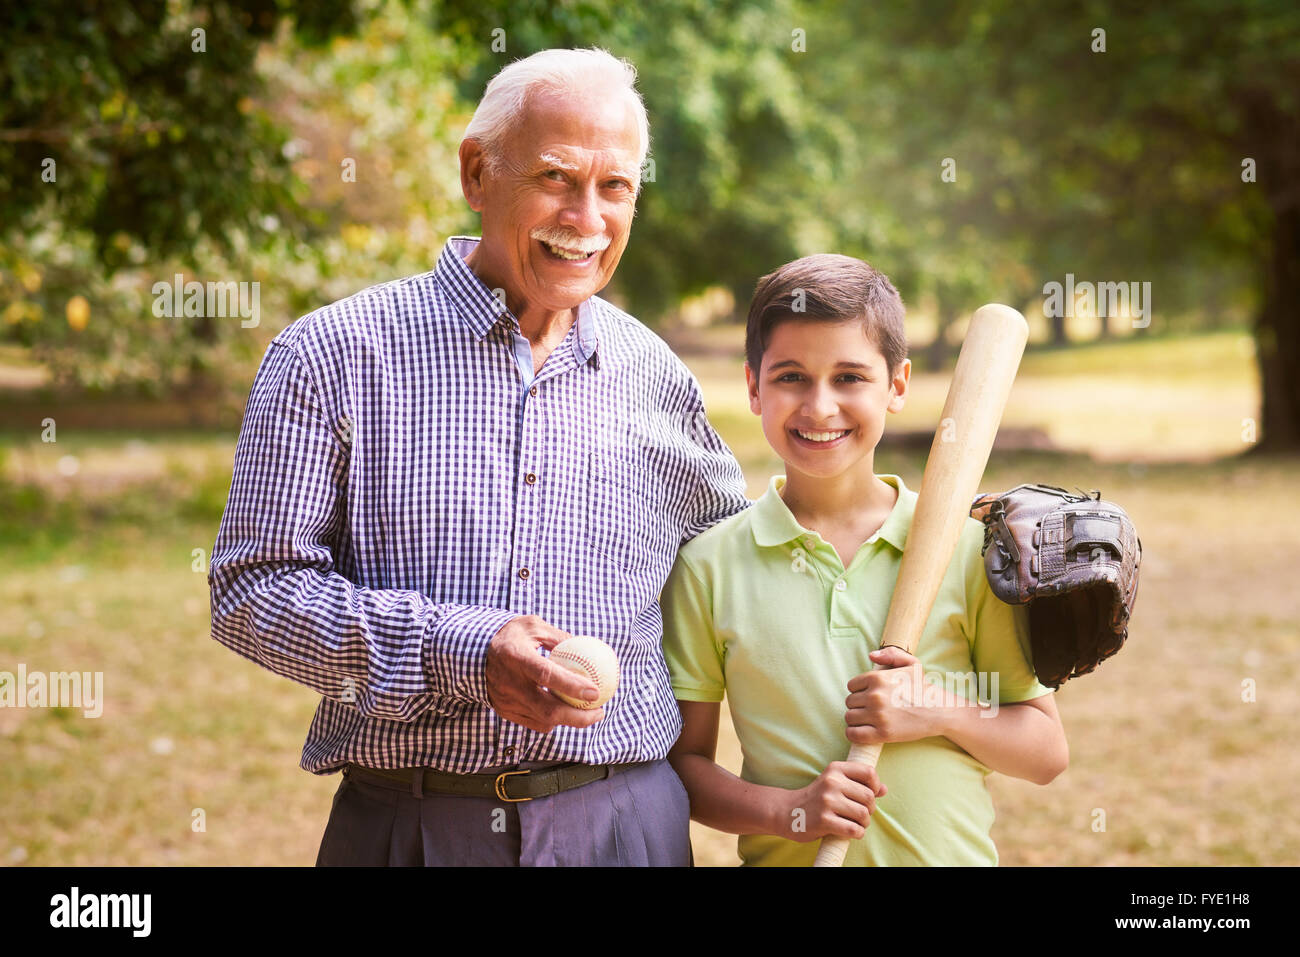 Grandpa spending time with grandson: Portrait of senior man playing baseball  with his grandchild in park. The old man embraces t Stock Photo - Alamy